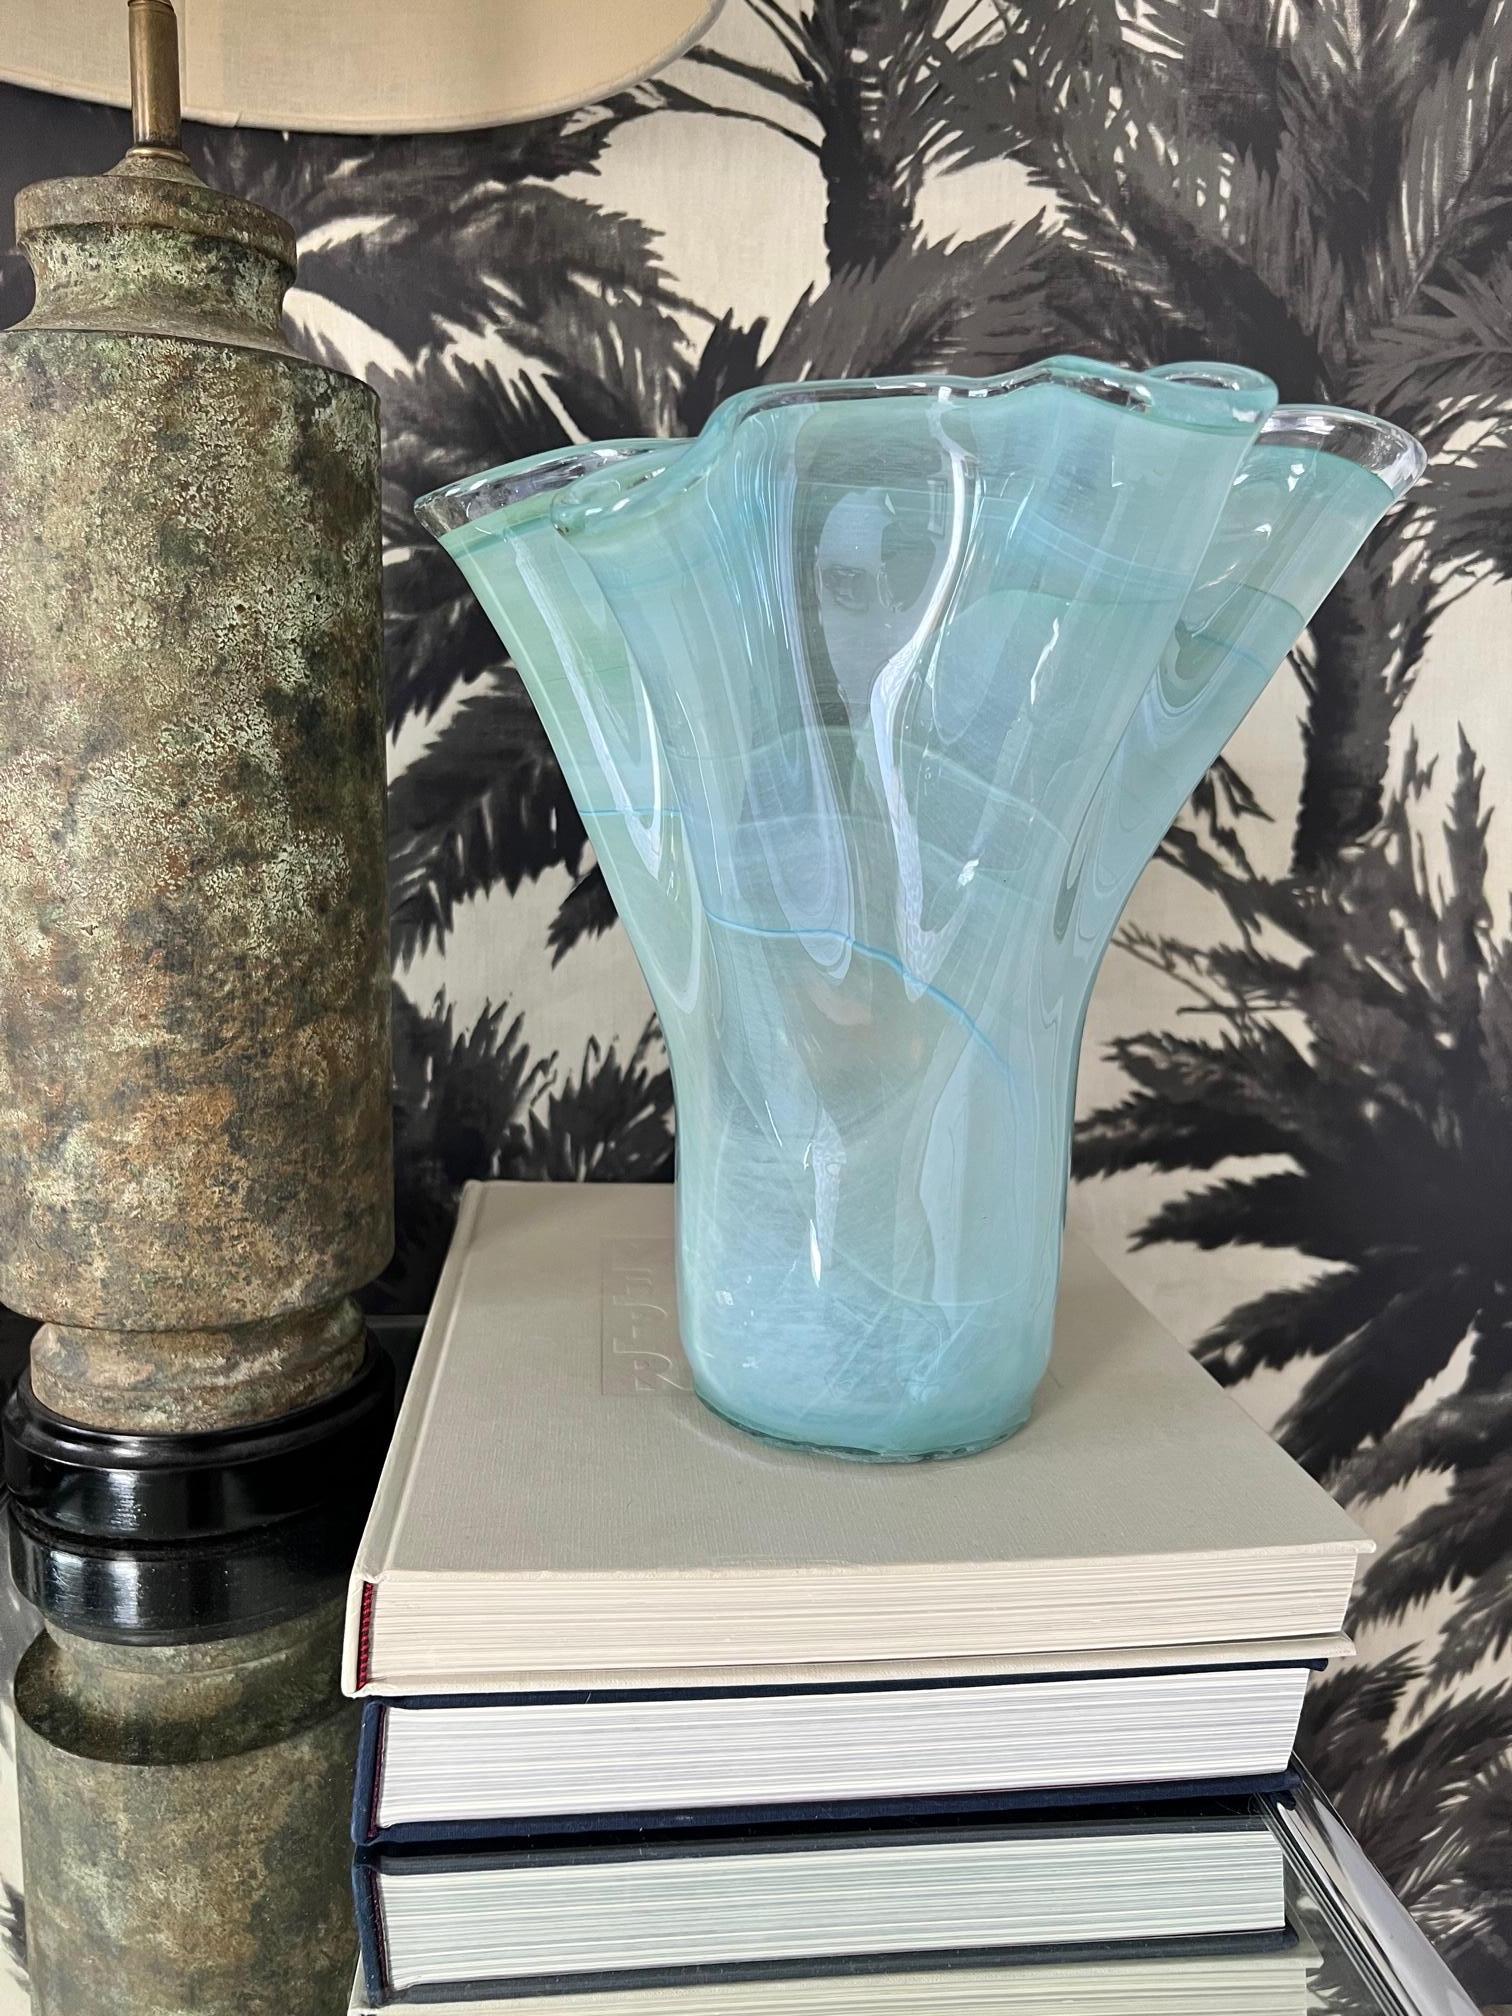 Large Fazzoletto Murano glass vase in hues of celadon green, turquoise, and aqua. The vase features folds along the sides and rims resembling a handkerchief, also referred to as Fazzoletto, the Italian word for handkerchief. Vase features a clear